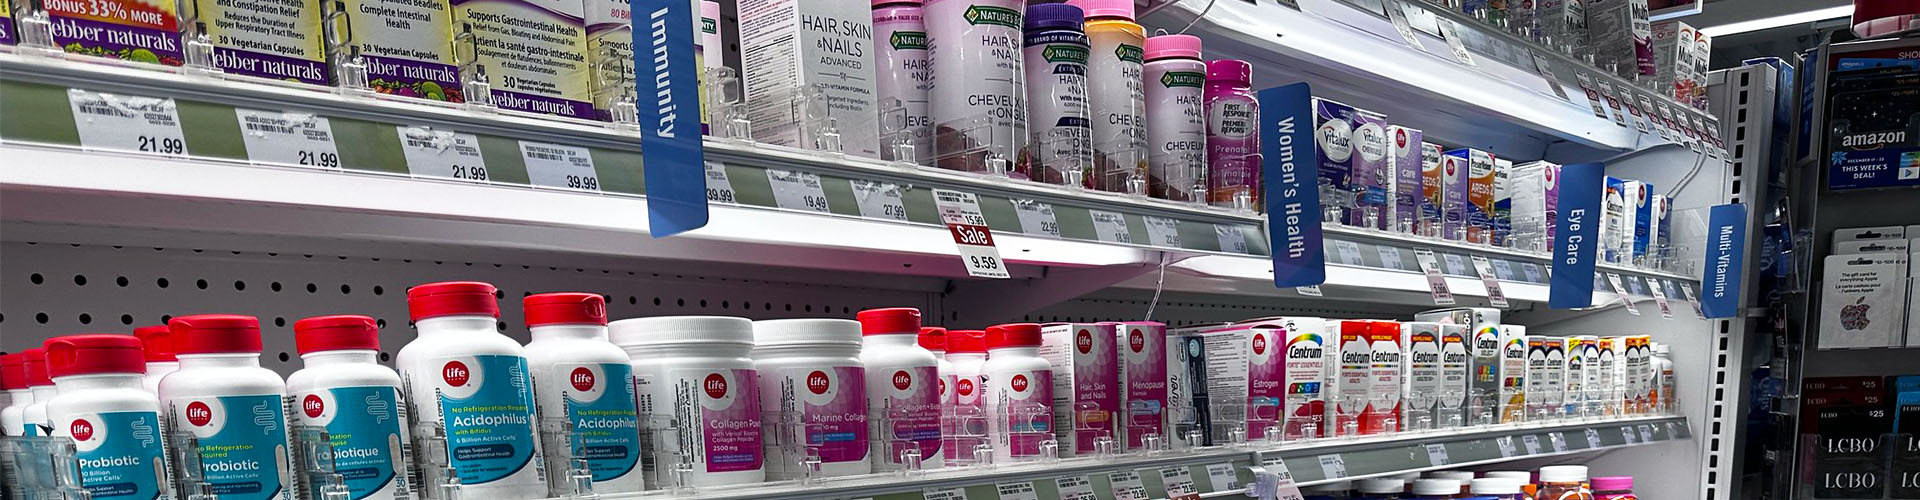 Banner featuring shelf of bottled vitamin supplements with signs designating categories